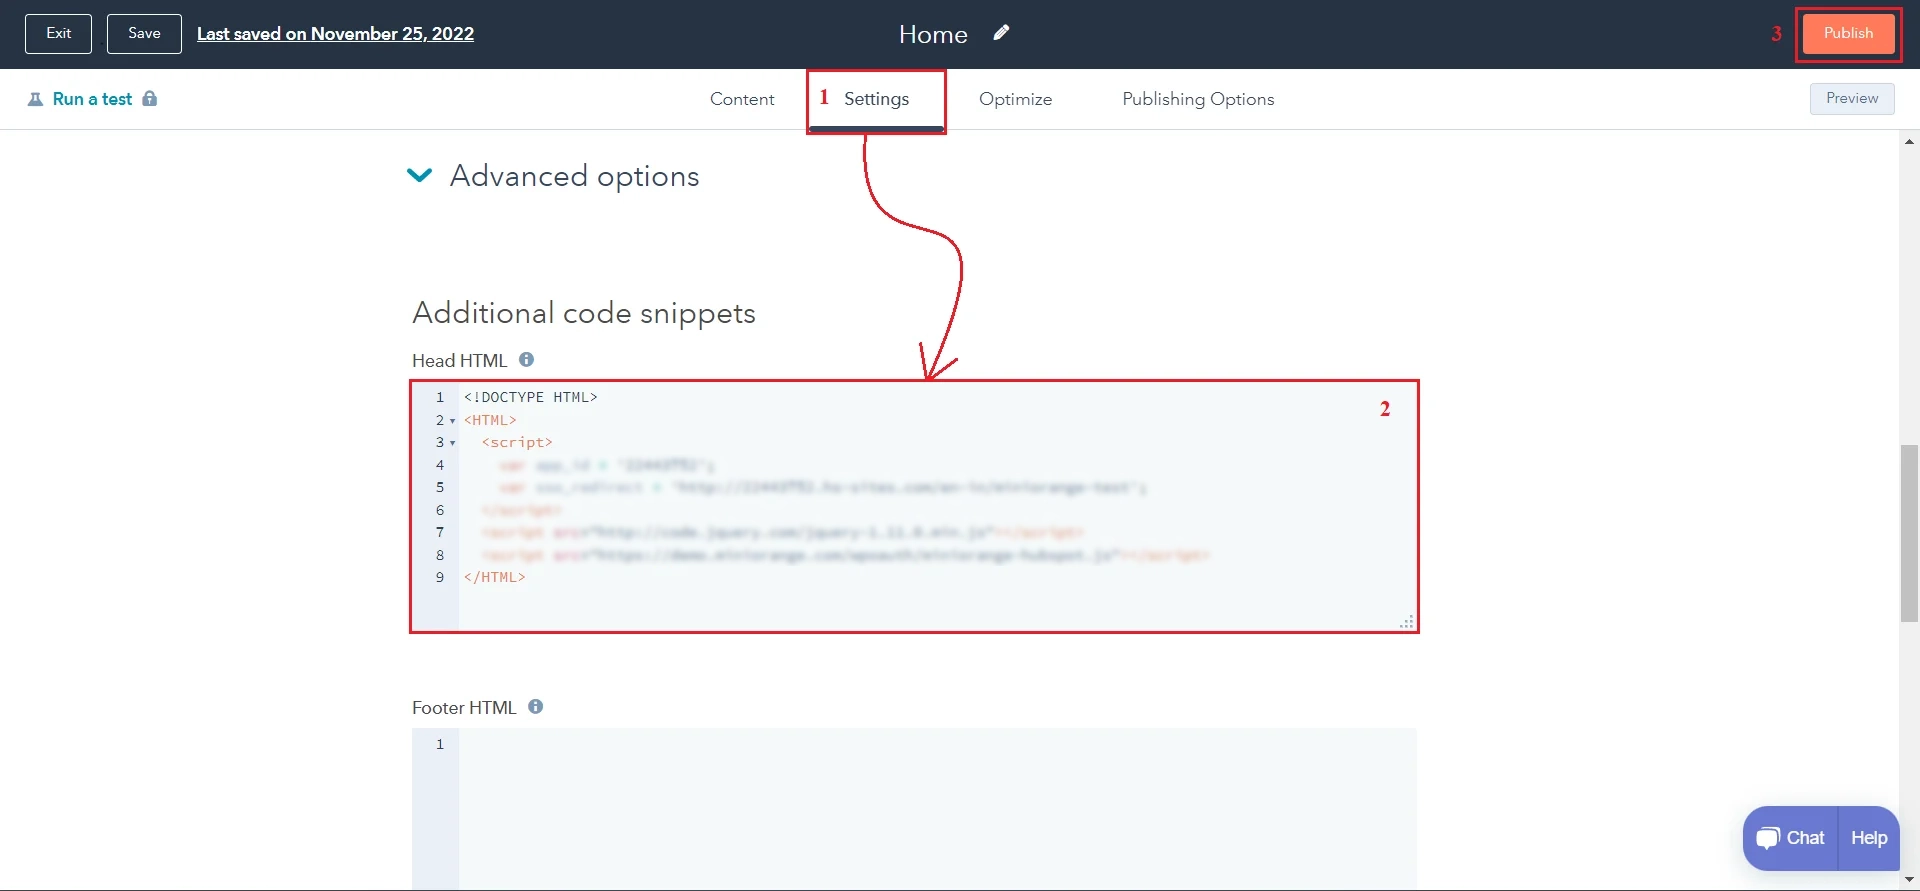 Enable  Hubspot Single Sign-On(SSO)  Login using AWS Cognito as Identity Provider
  